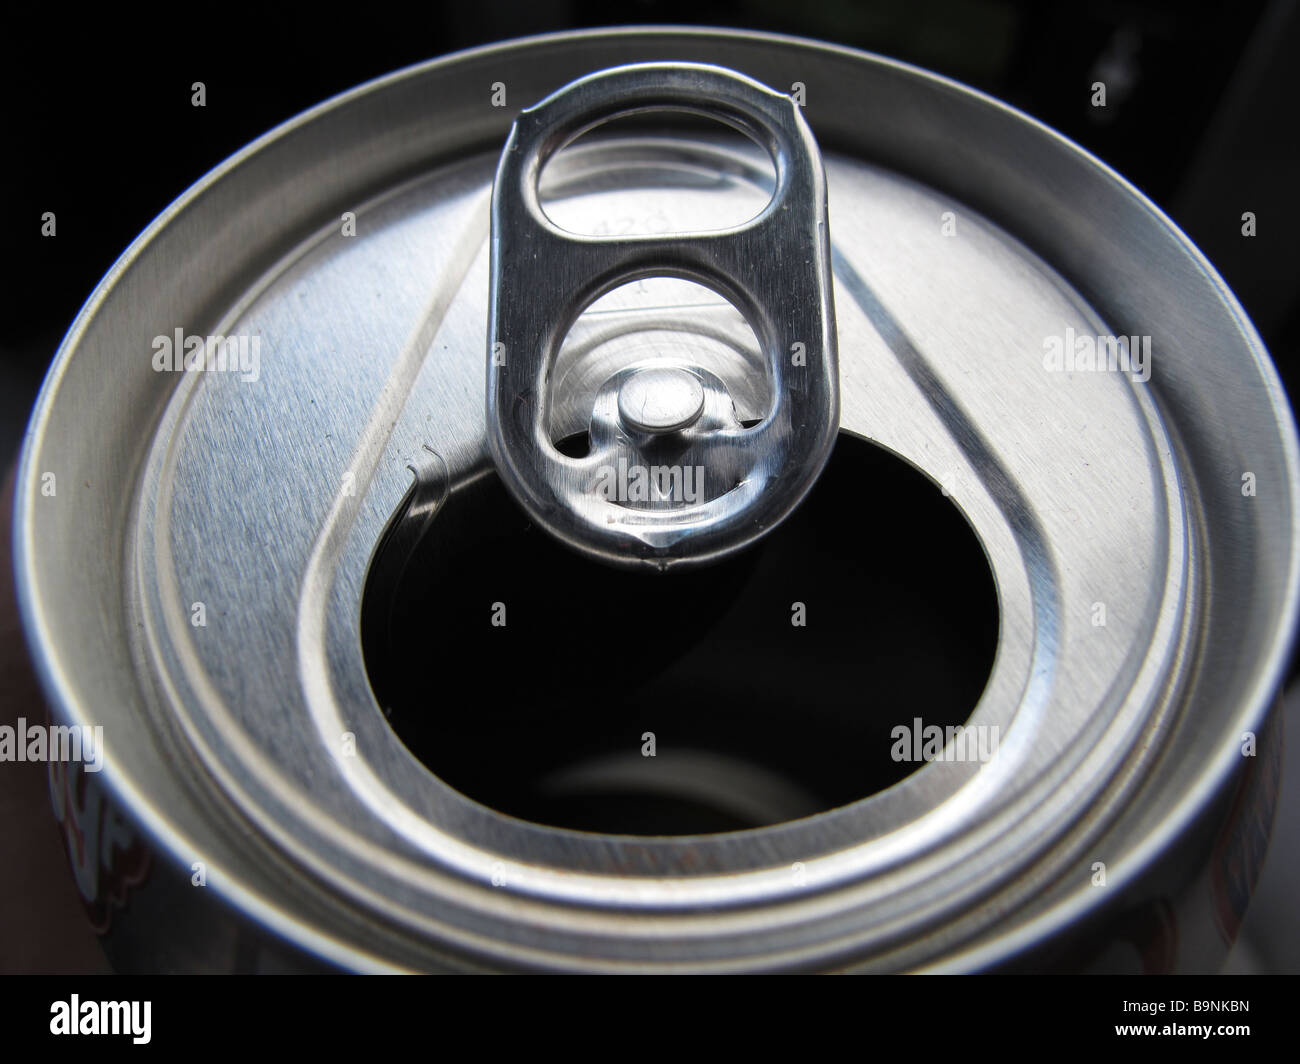 Top of ring pull drinks can Stock Photo